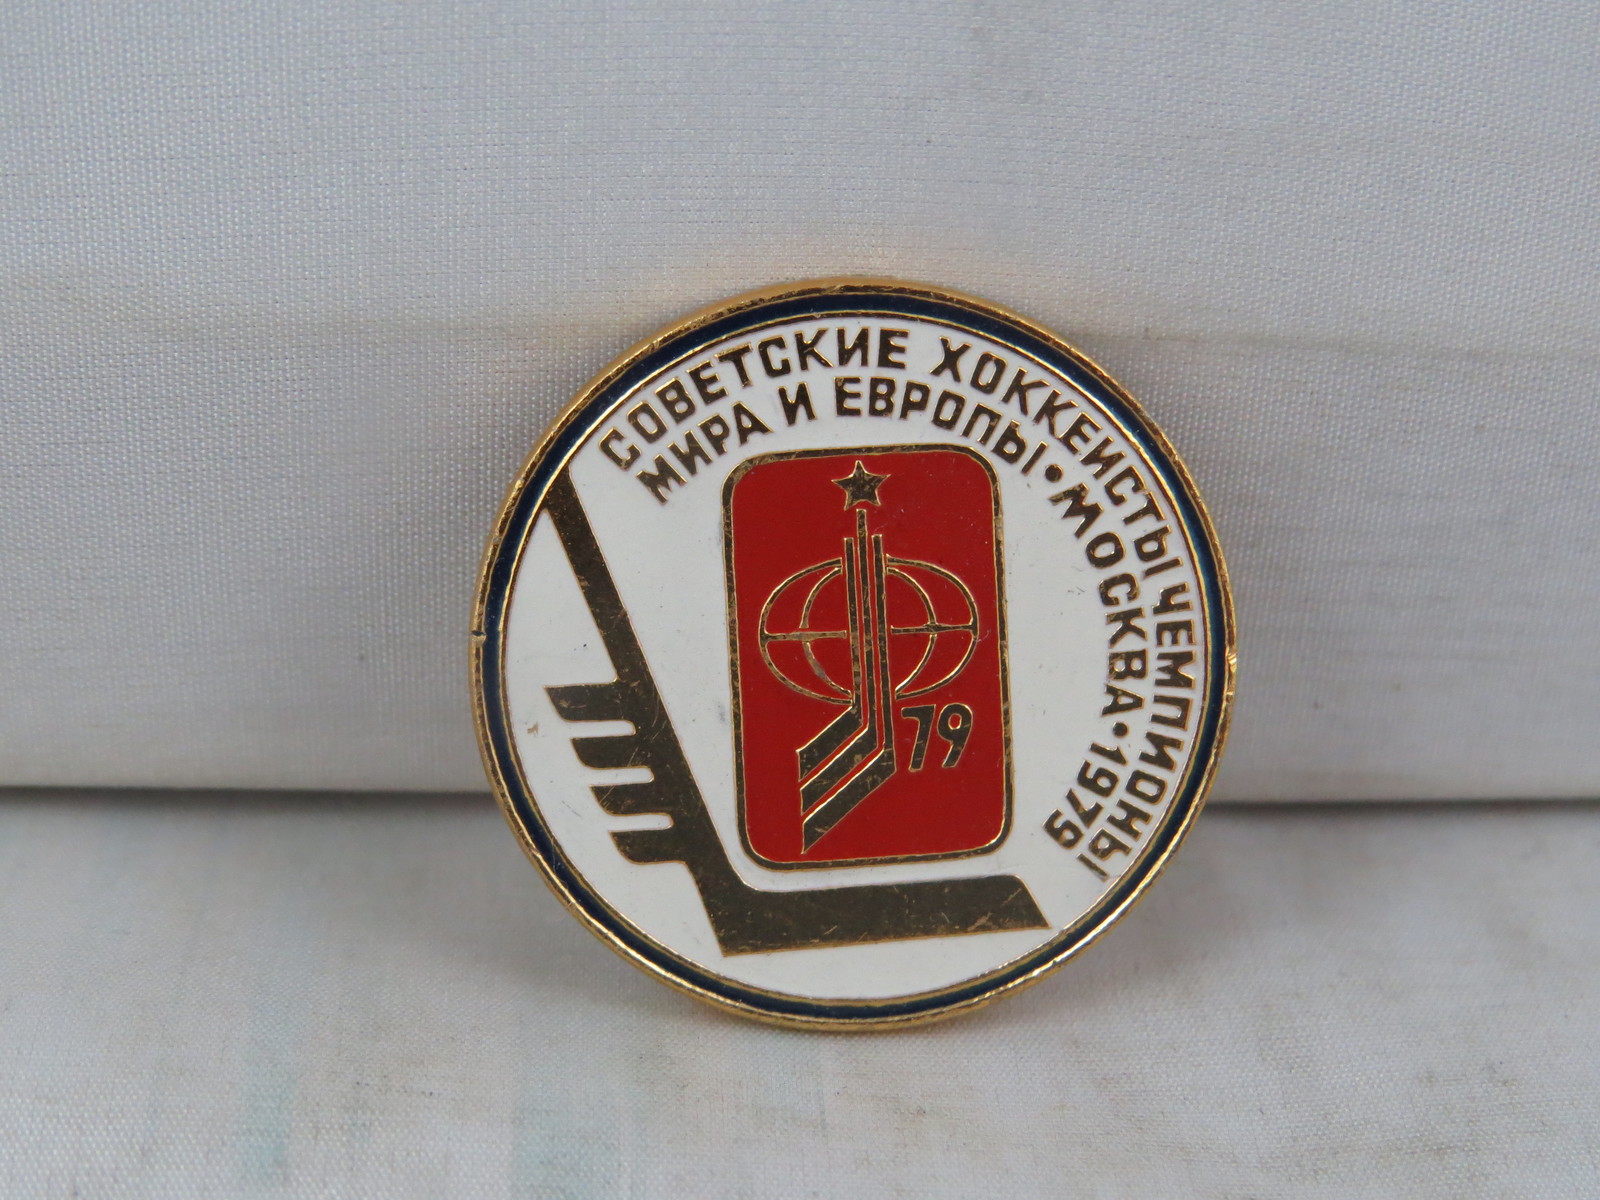 Primary image for Vintage Hockey Pin - Team USSR 1979 World Champions - Stamped Pin